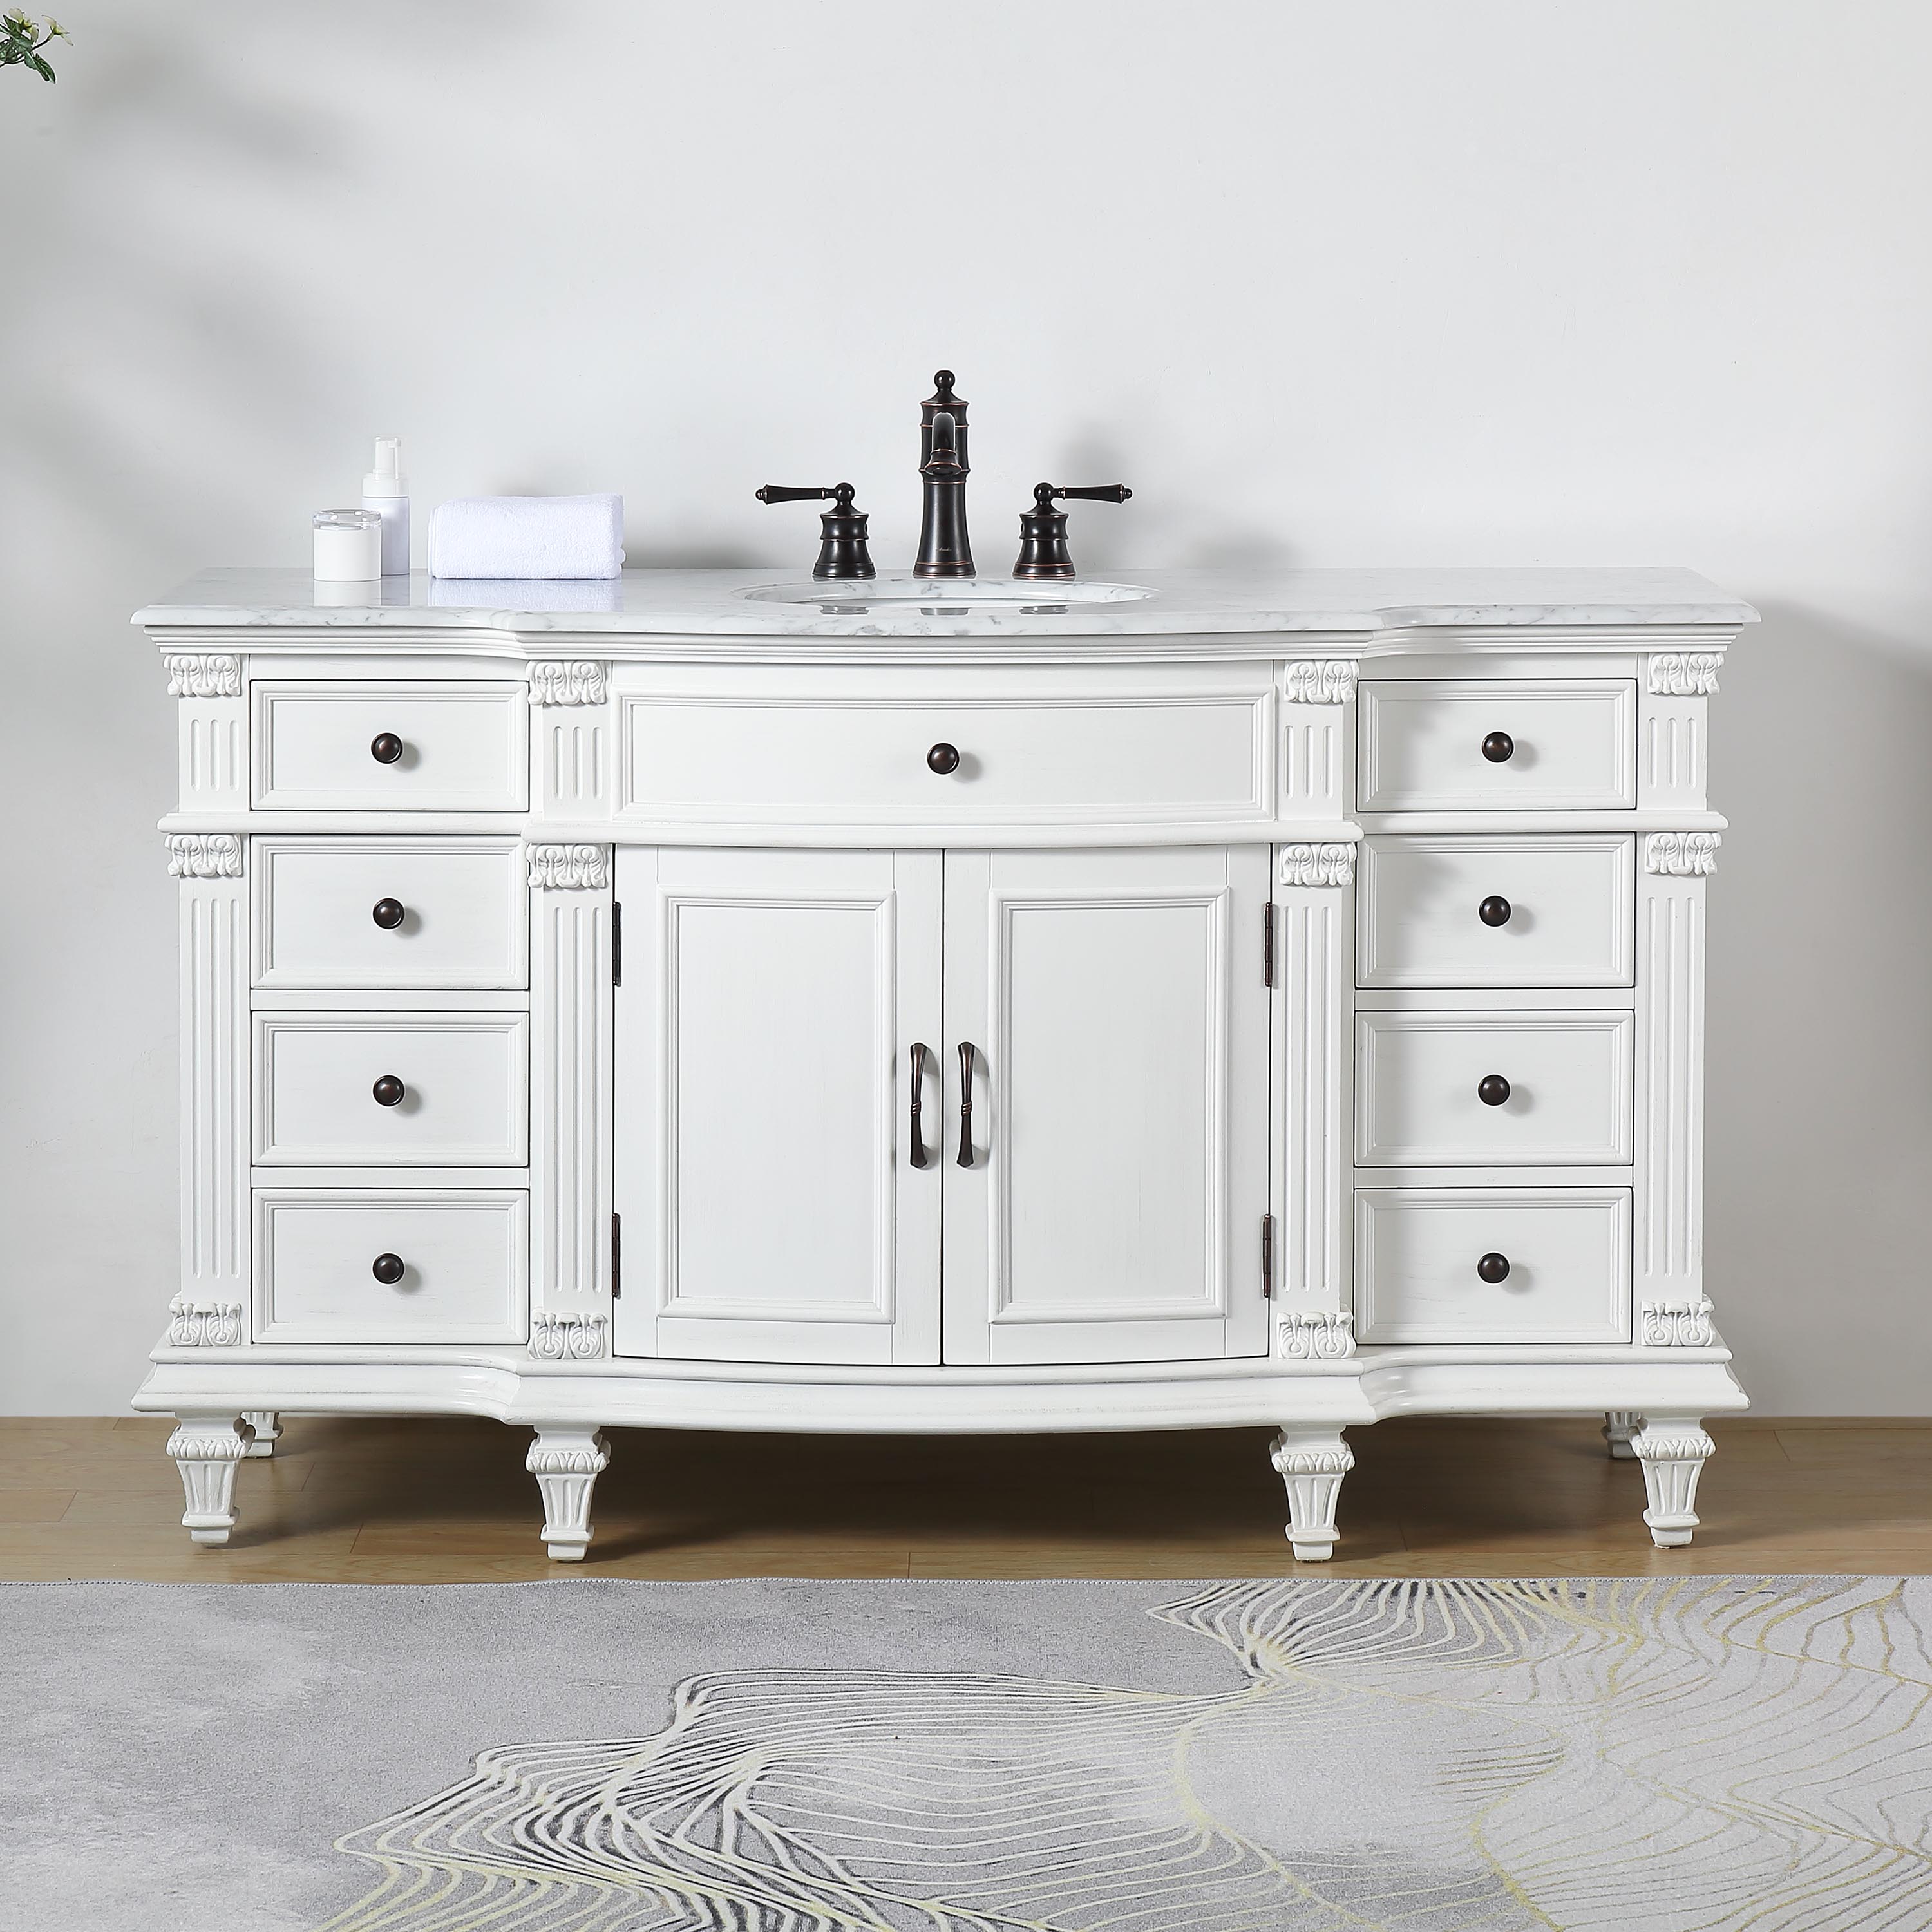 Adelina 60" Antique White Traditional Style Single Sink Bathroom Vanity with White Carrara Marble Countertop